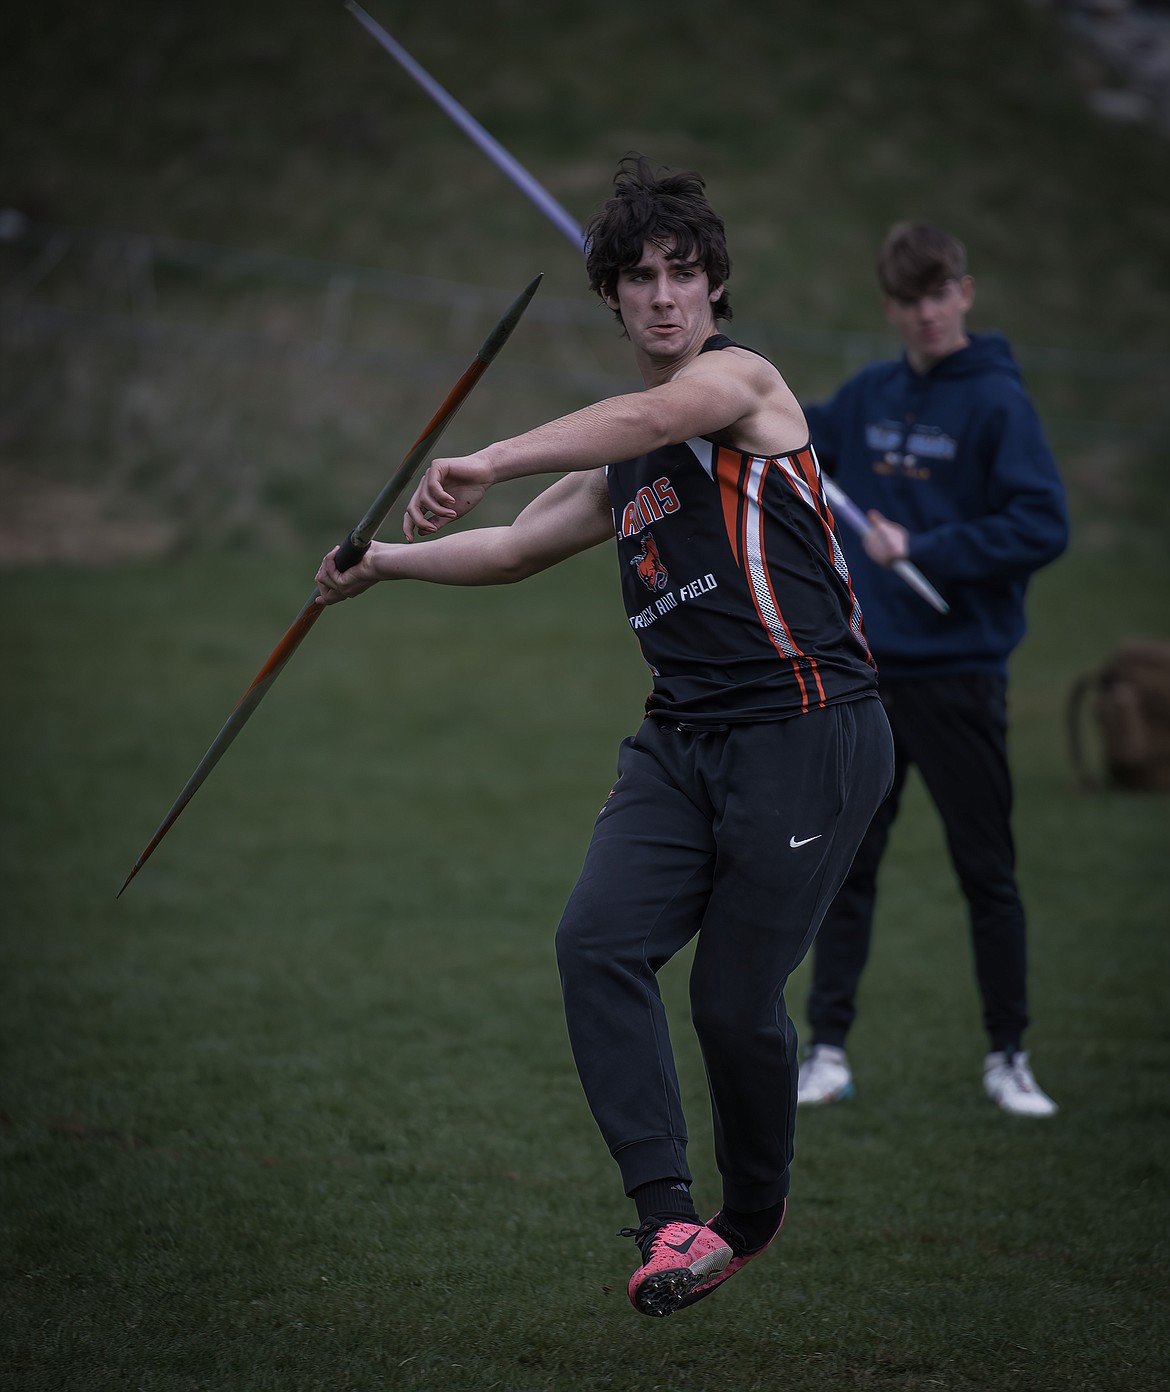 Plains senior Greg Tatum readies to release the javelin during this past week's Thompson Falls Invitational track and field meet.  (Photo by Tracy Scott)